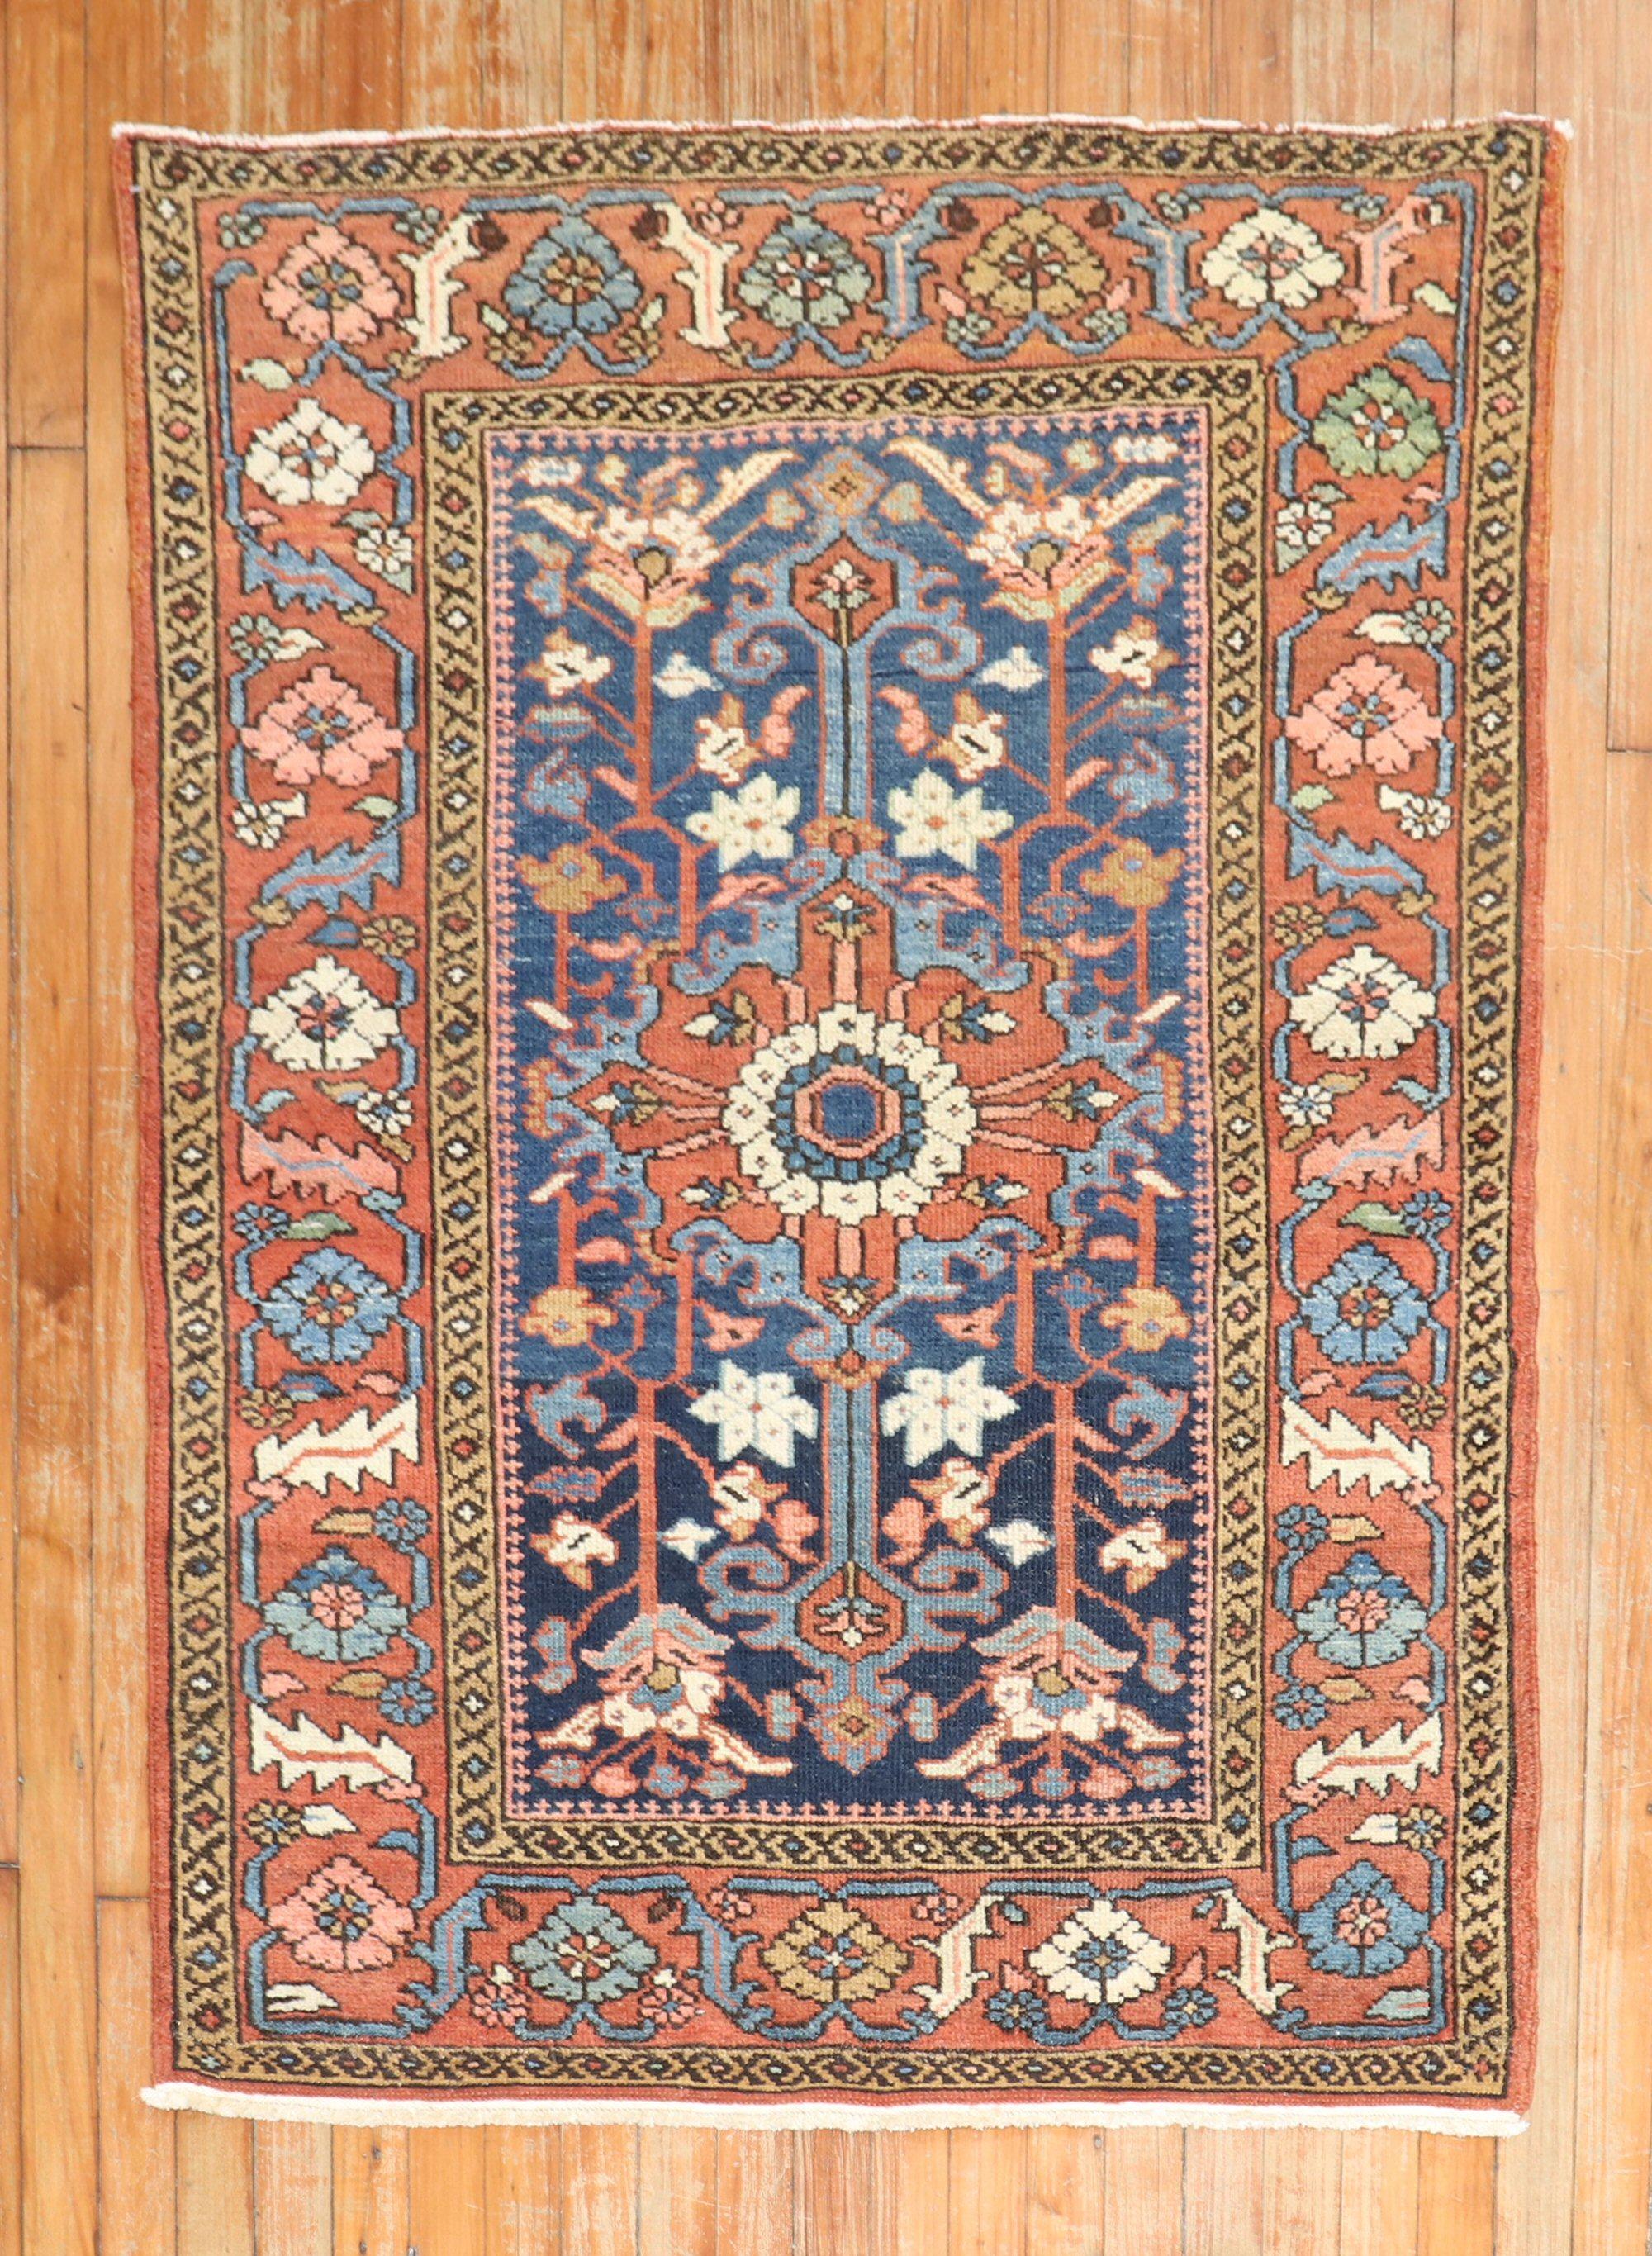 A traditional early 20th century Persian Heriz scatter size rug

Measures: 3'4'' x 4'6''.